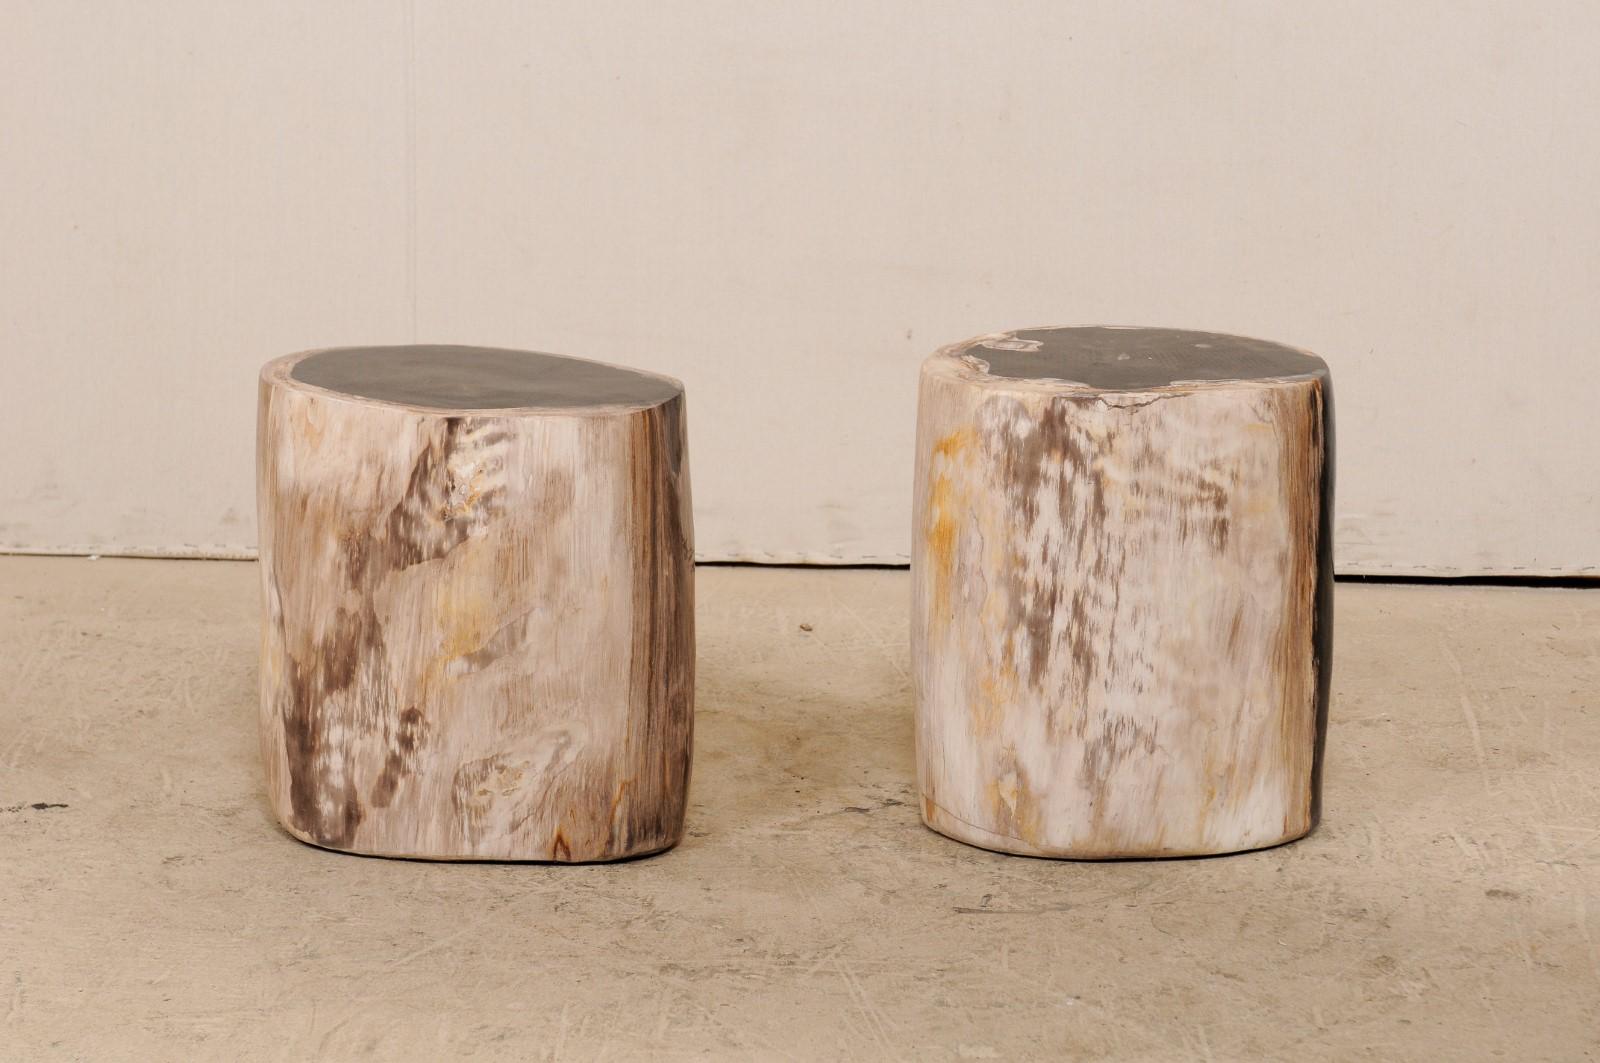 A pair of black and tan petrified wood drinks tables (or stools). This pair of petrified wood drinks tables features a smooth polished finish throughout. These tables have been fashioned from a single piece of petrified wood, which is a fossil. Over